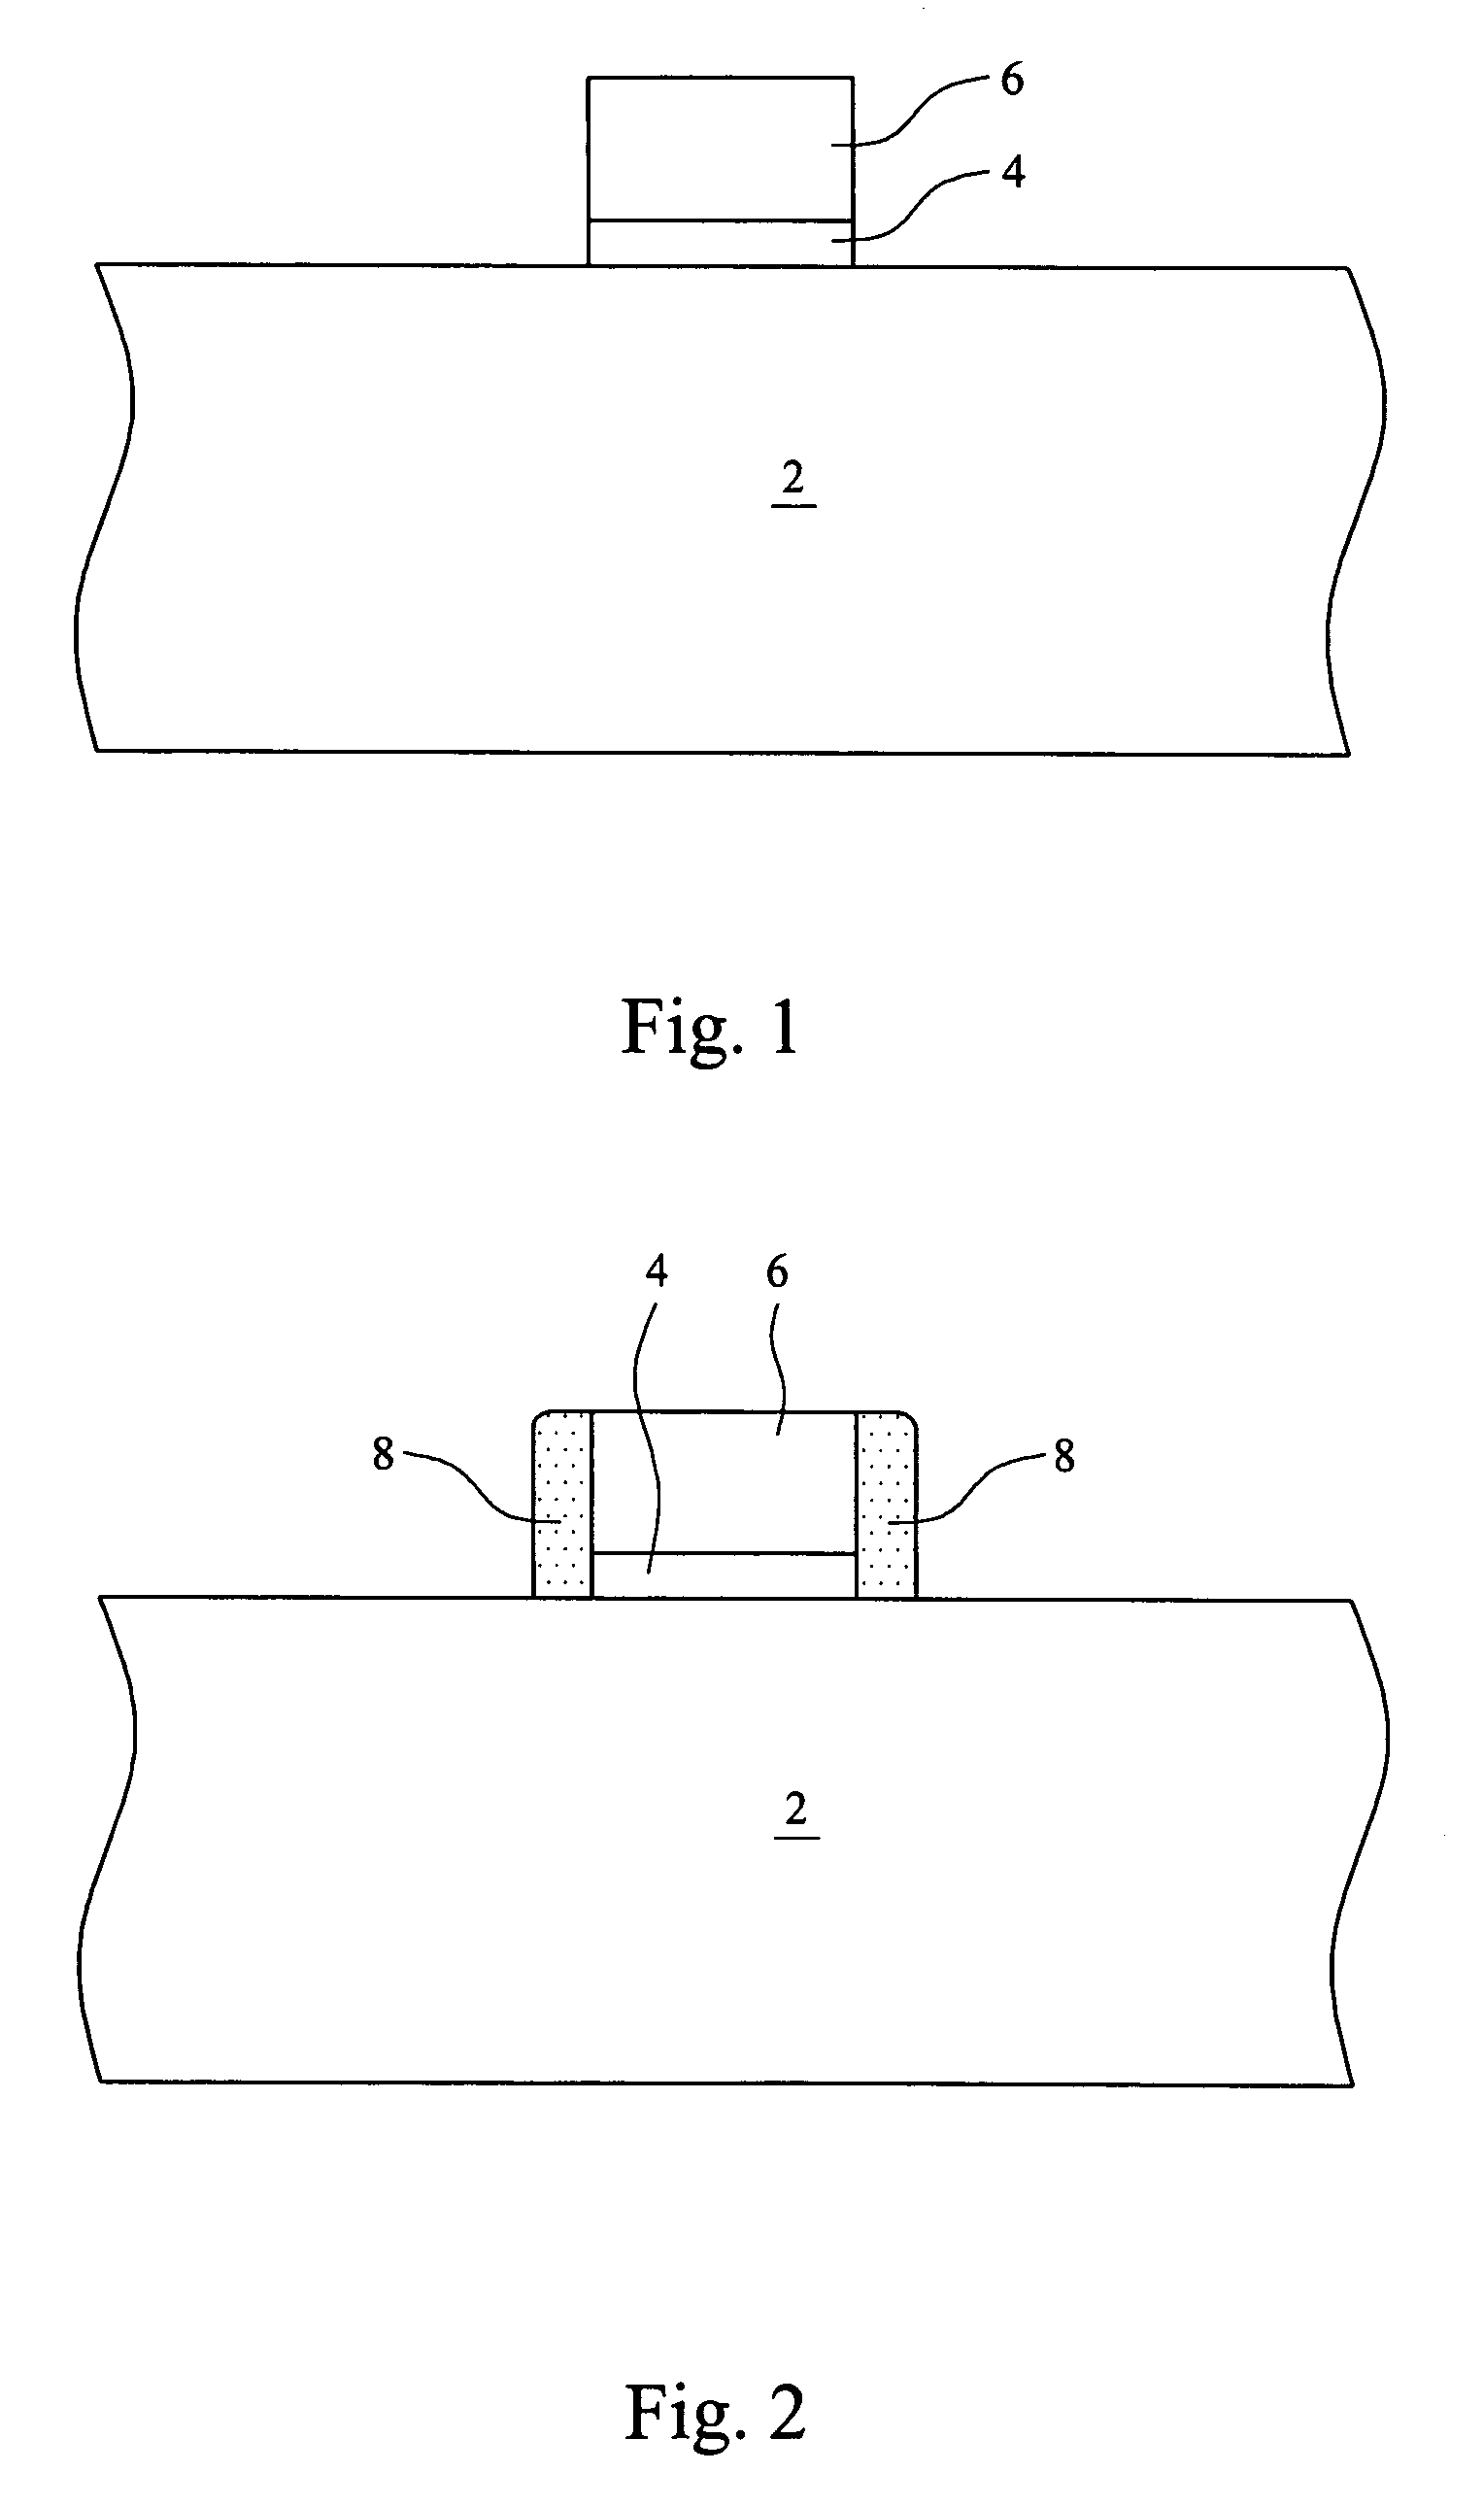 Silicon oxycarbide and silicon carbonitride based materials for MOS devices